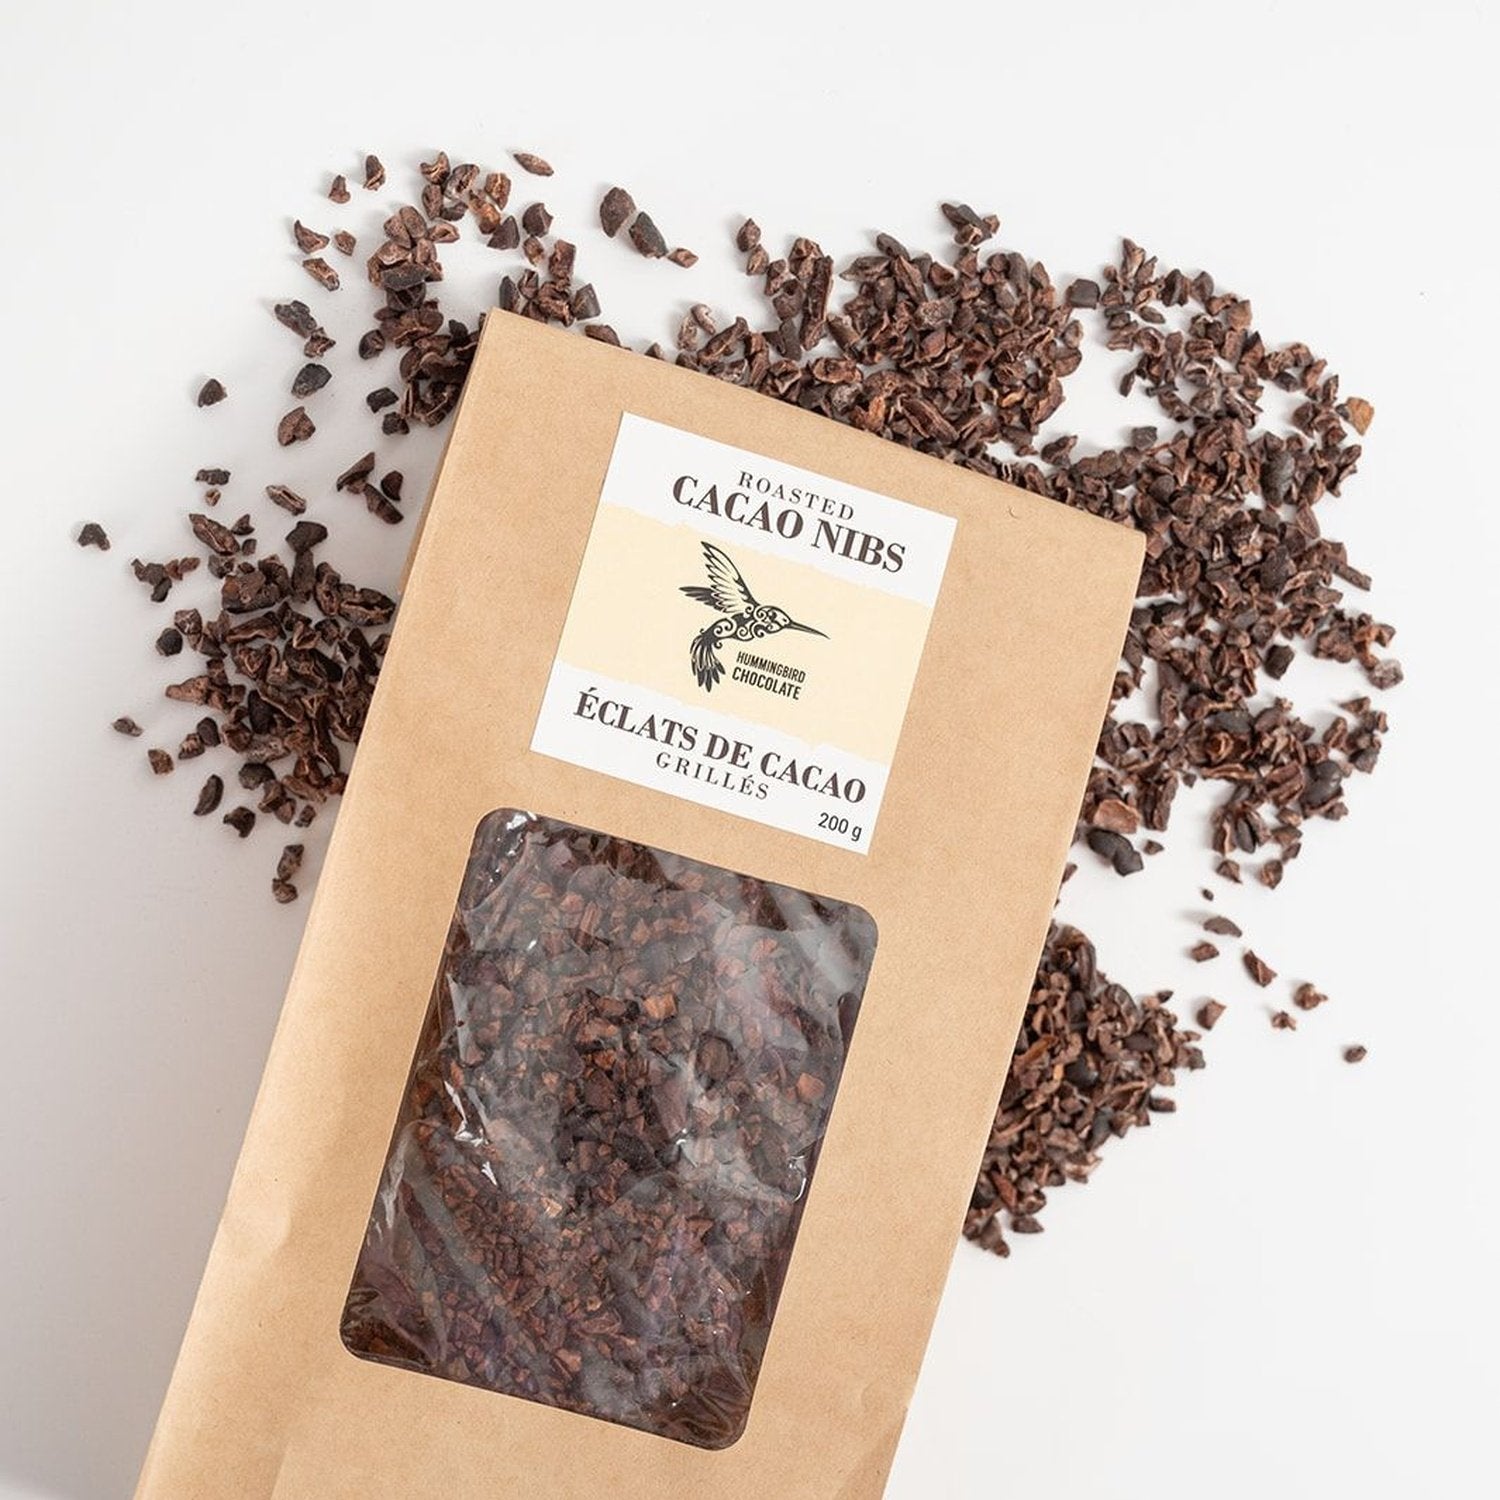 Roasted cacao nibs